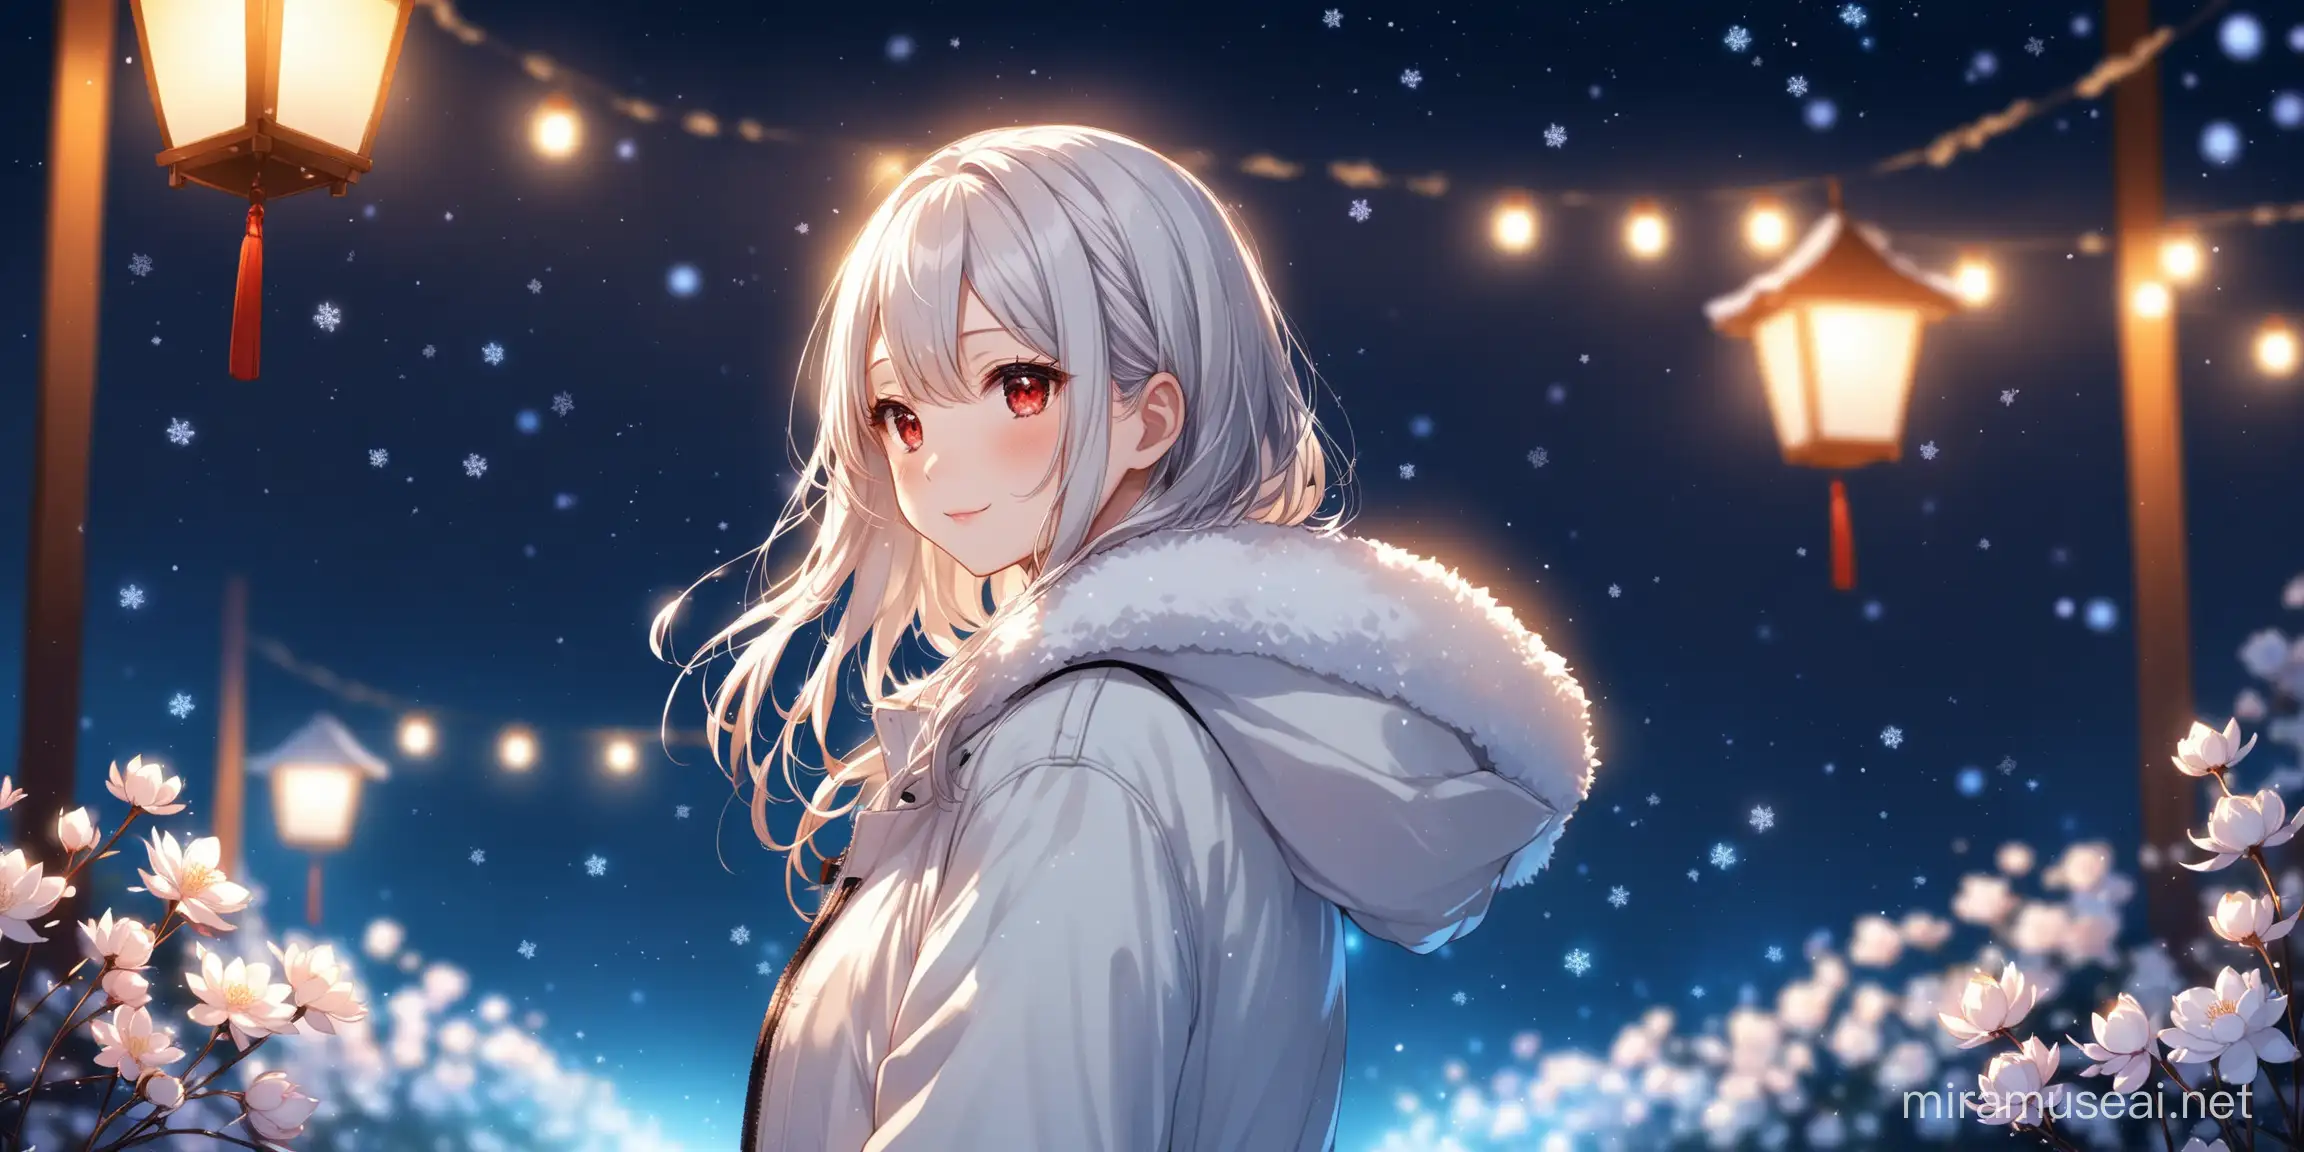 Beautiful Nighttime Portrait of a Girl in White Parka and Ankle Boots with Flowers in Warm Lighting